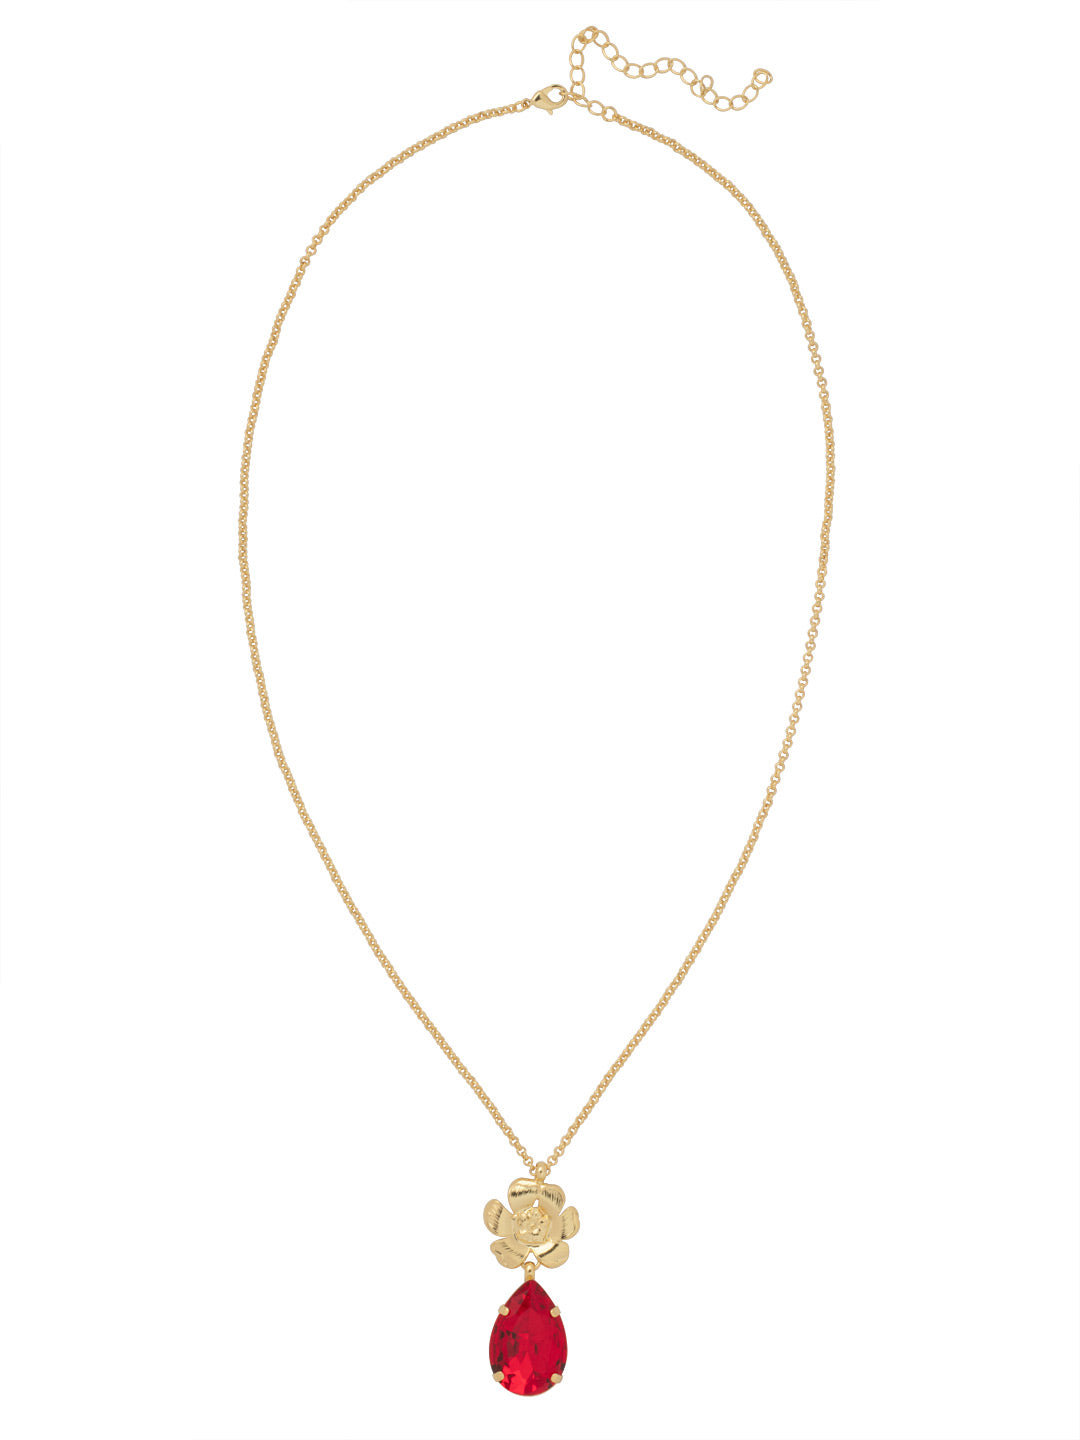 Fleur Pendant Necklace - NFL11BGFIS - <p>The Fleur Pendant Necklace features a large pear cut crystal and metal flower pendant dangling from a long, adjustable chain, secured with a lobster claw clasp. From Sorrelli's Fireside collection in our Bright Gold-tone finish.</p>